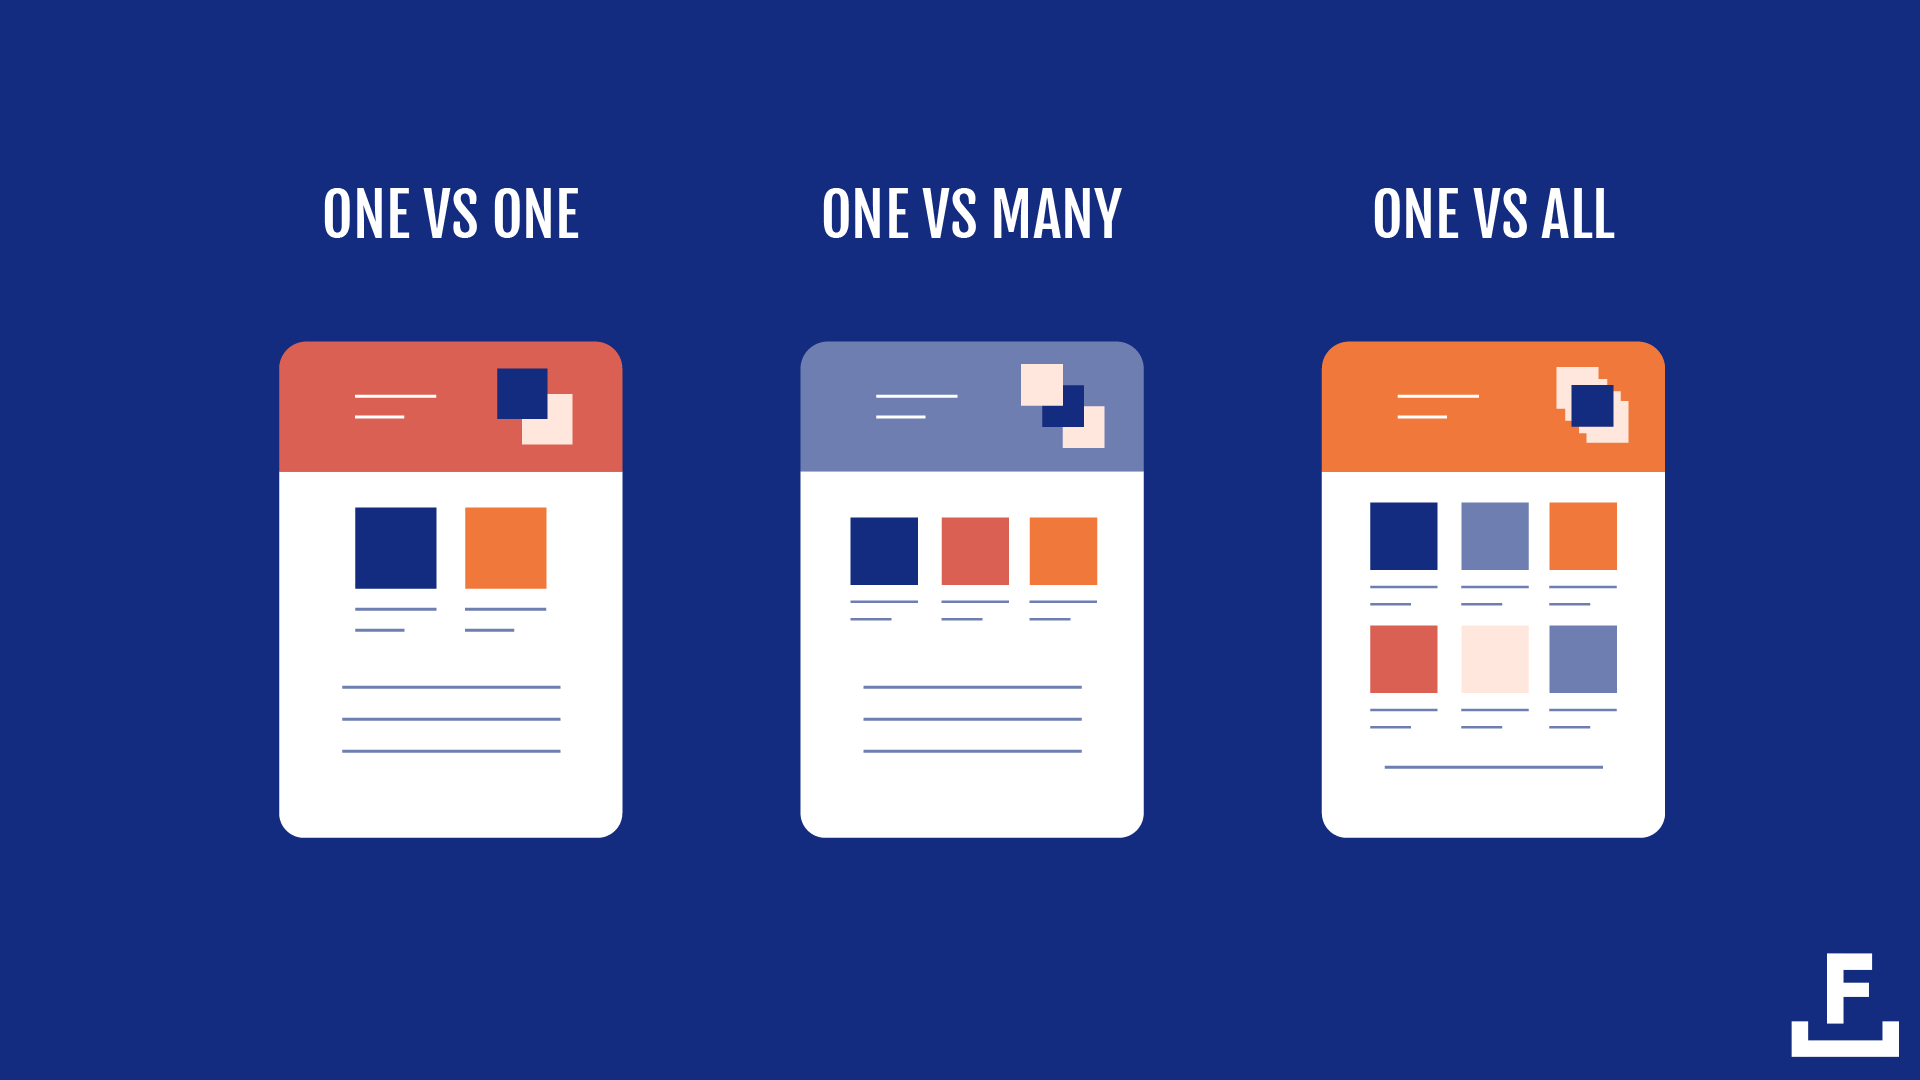 SaaS comparison pages come in a few different flavors: one vs one, one vs many, and one vs all.